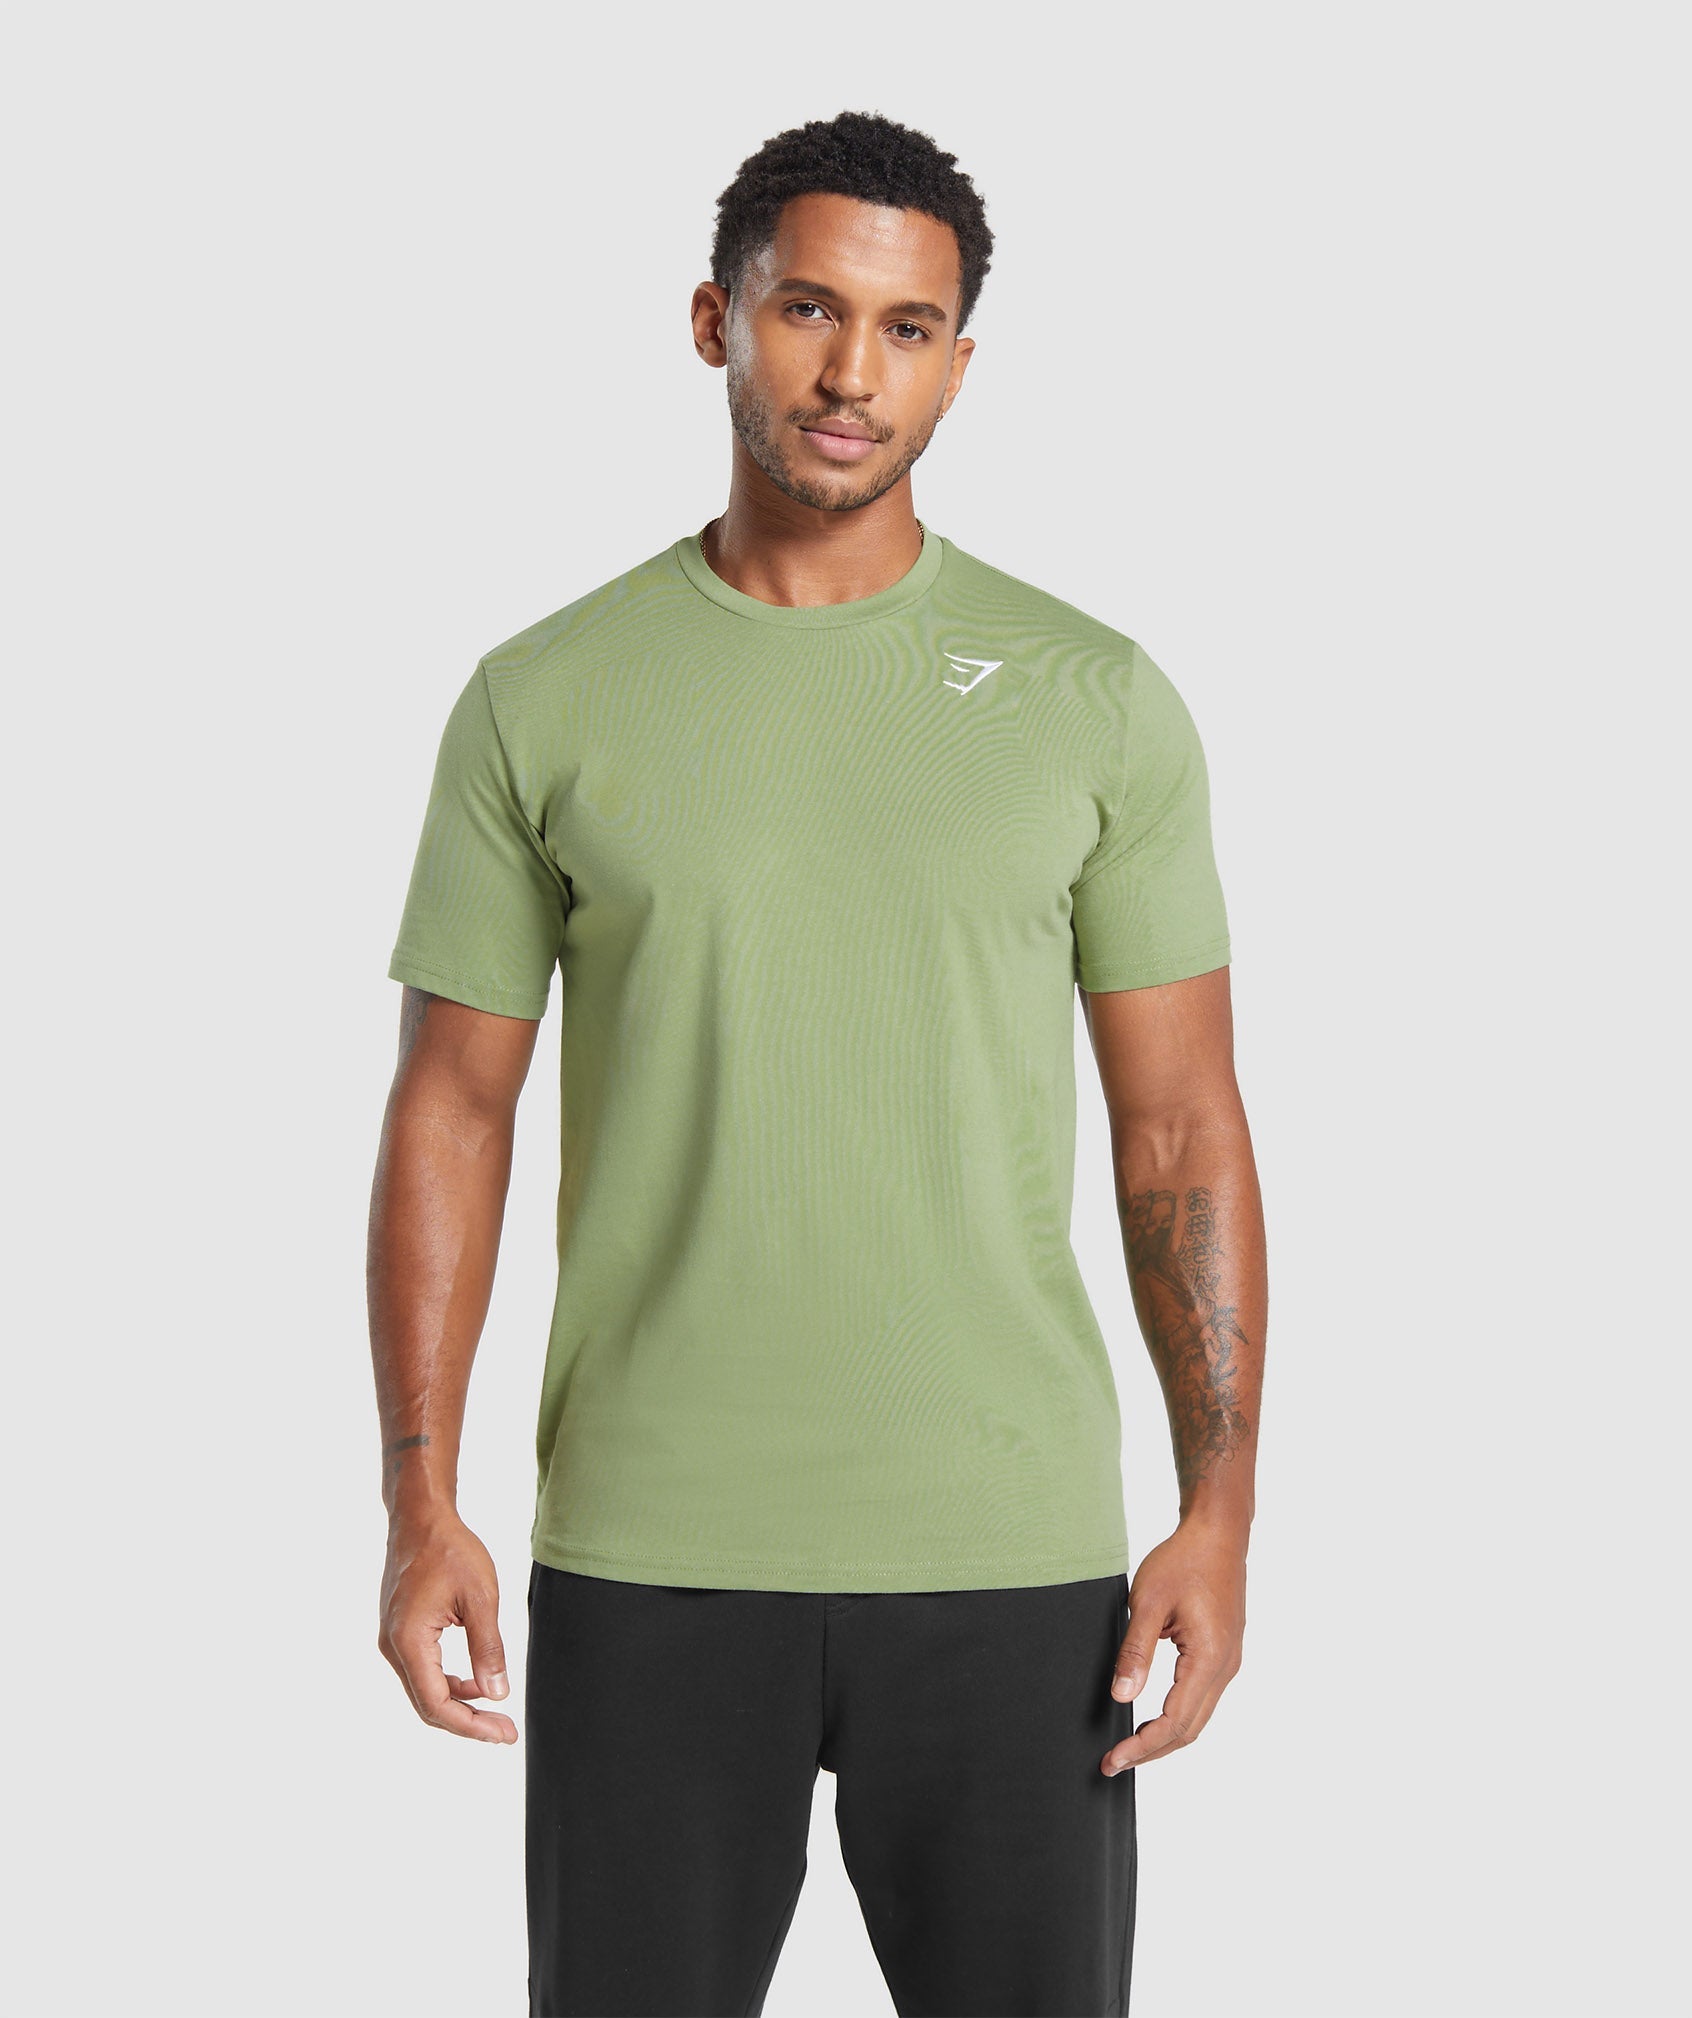 Crest T-Shirt in Natural Sage Green is out of stock